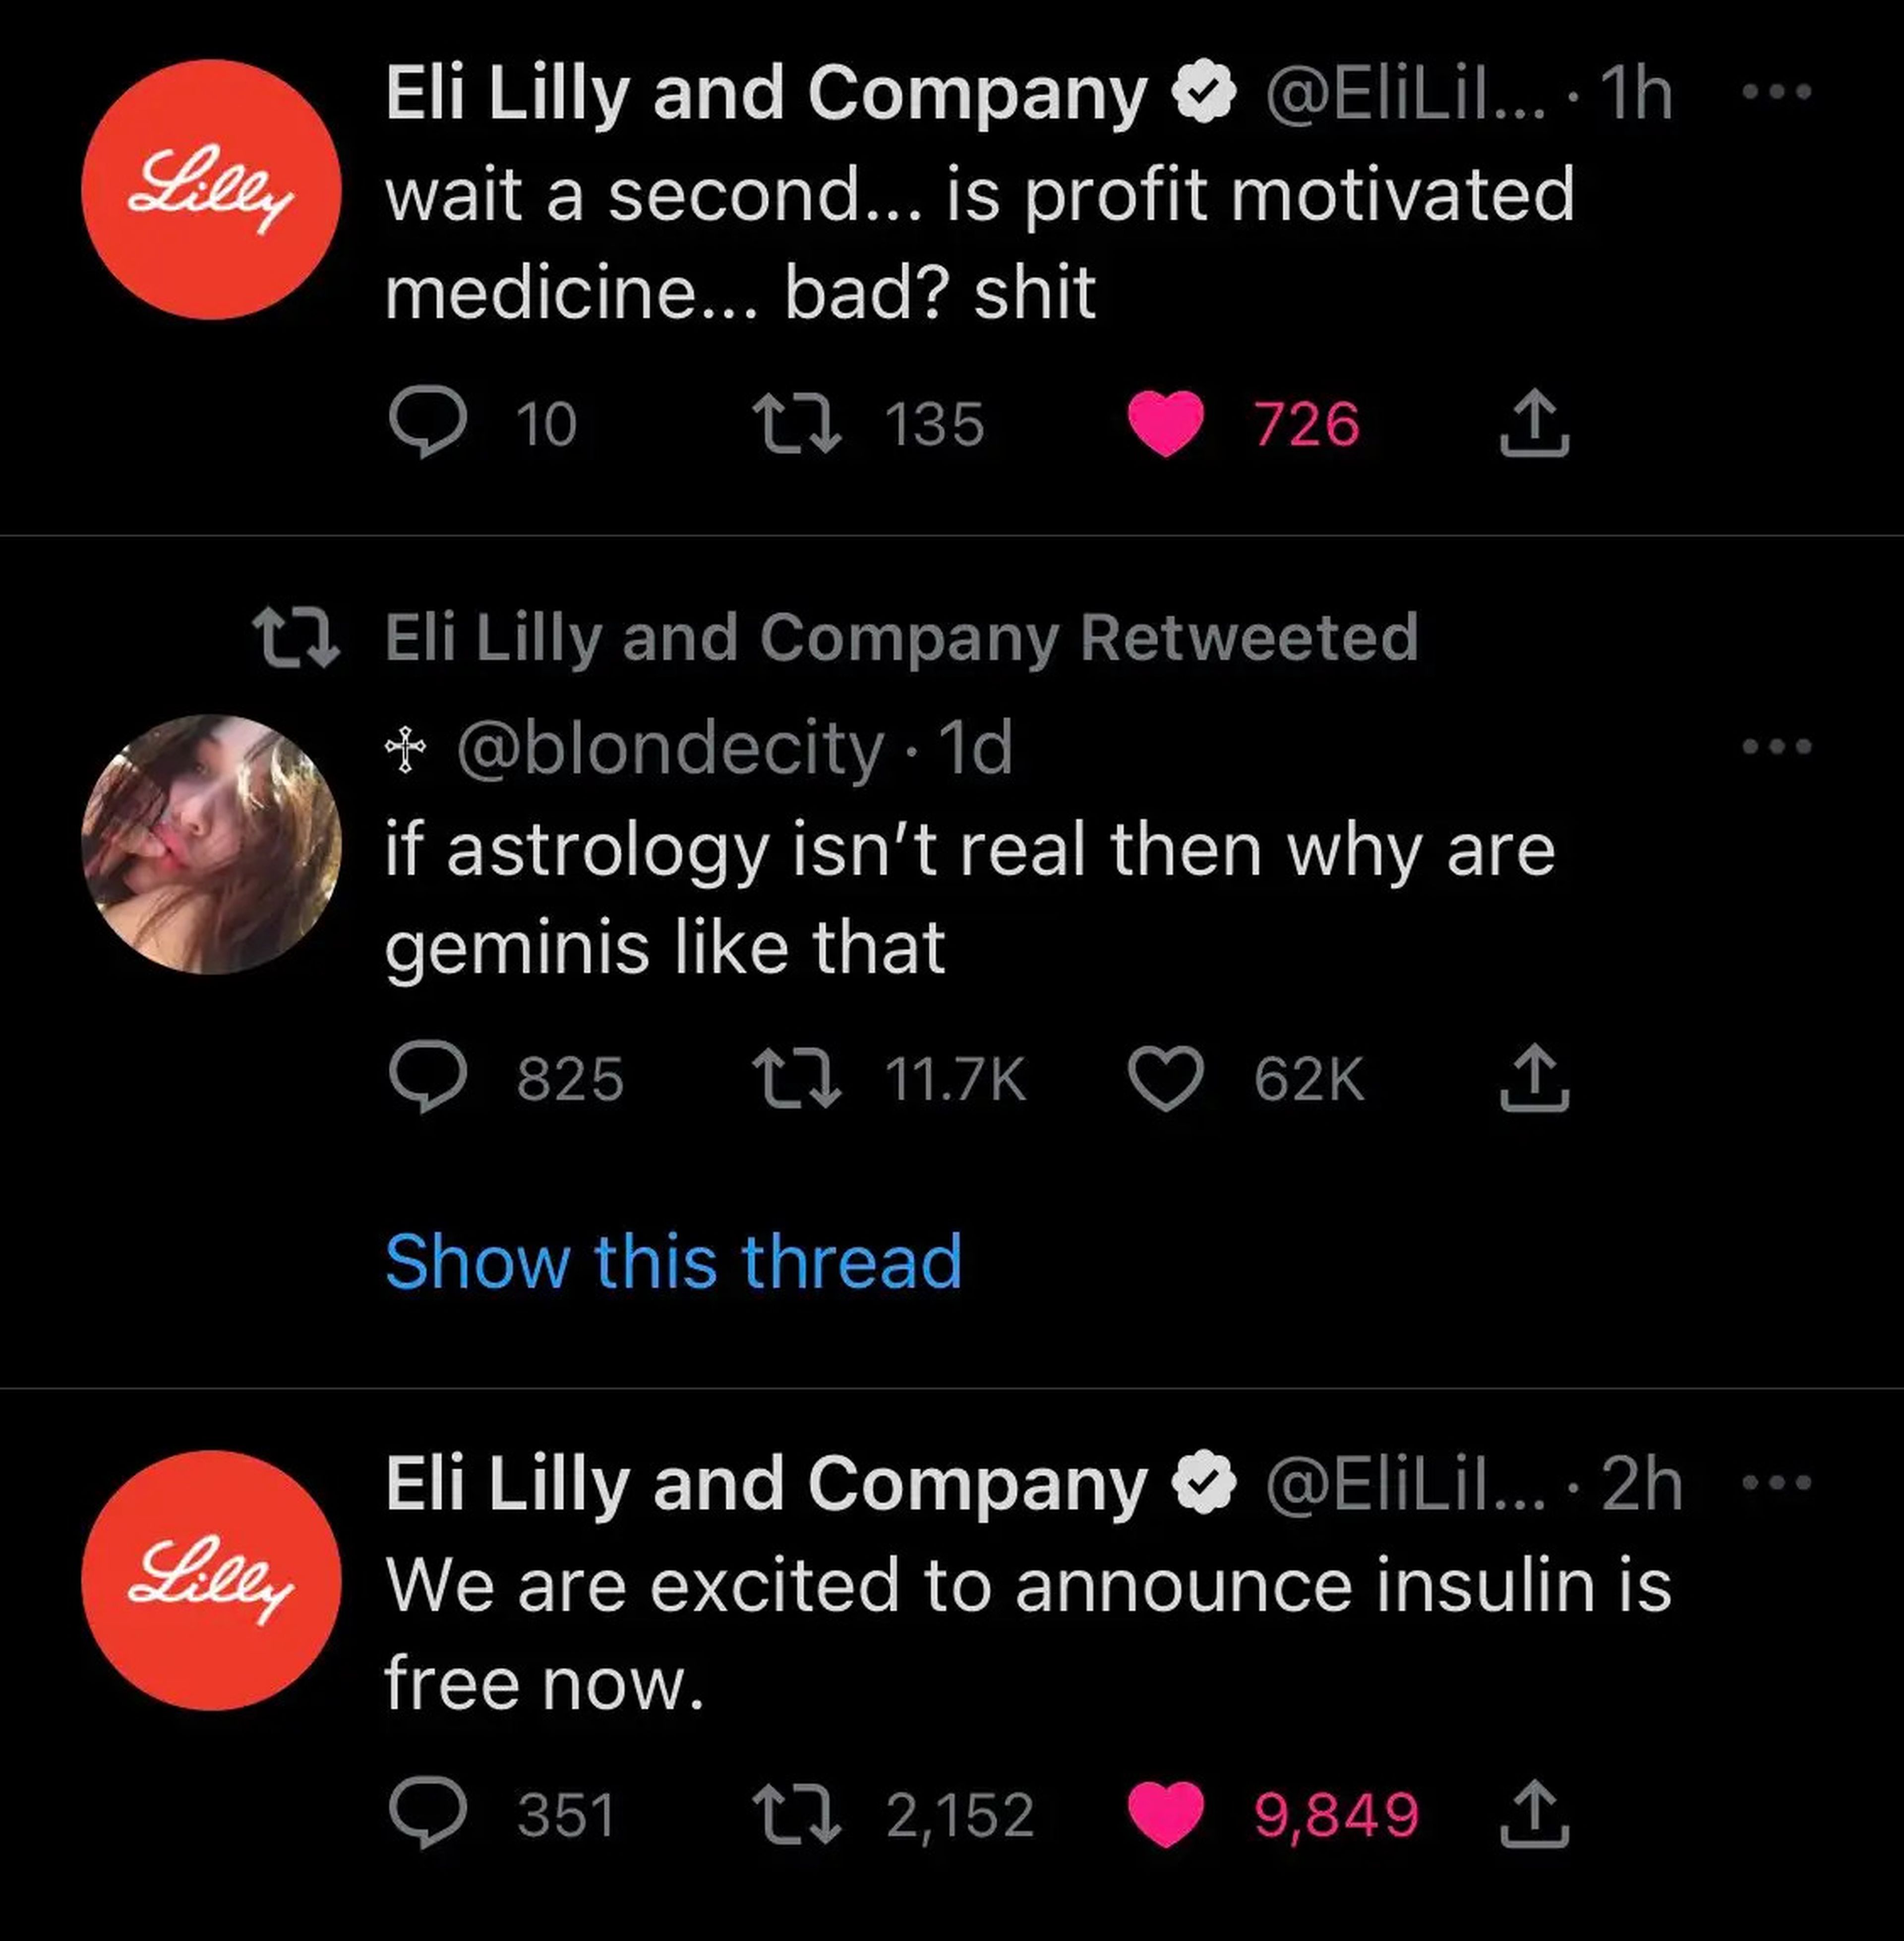 Tweet impersonating pharmaceutical company Eli Lilly.